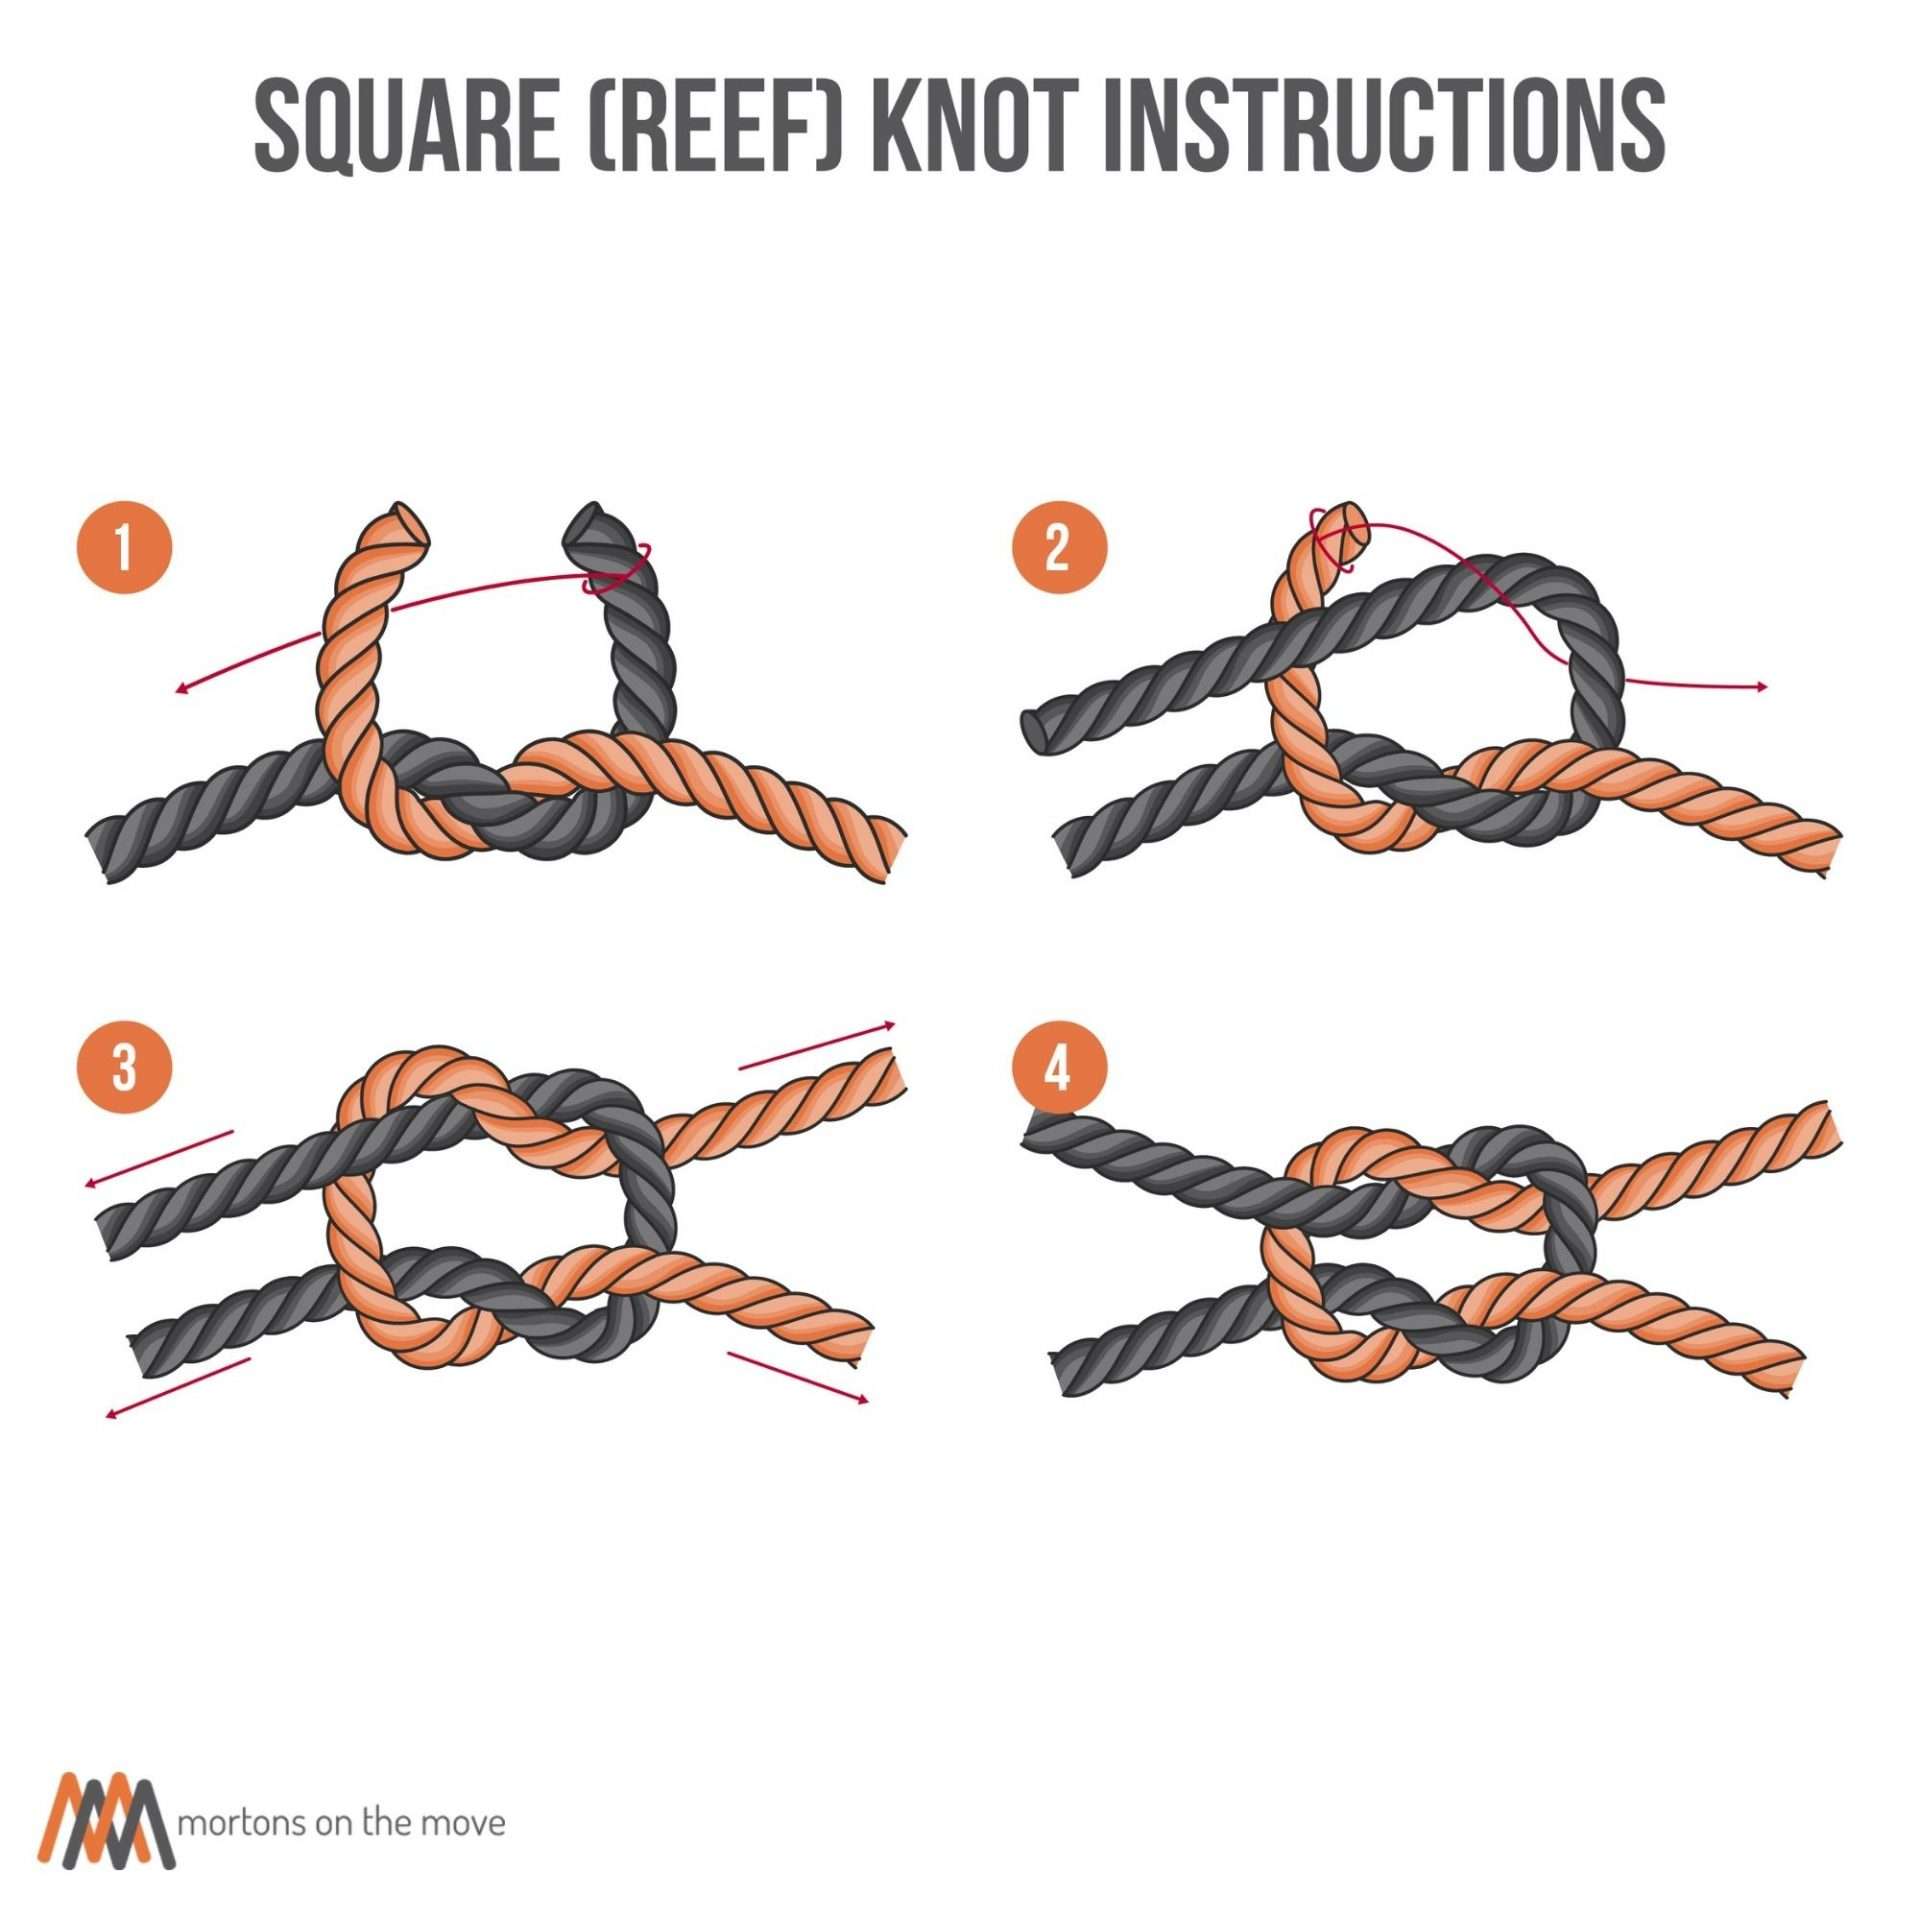 square reef knot instructions